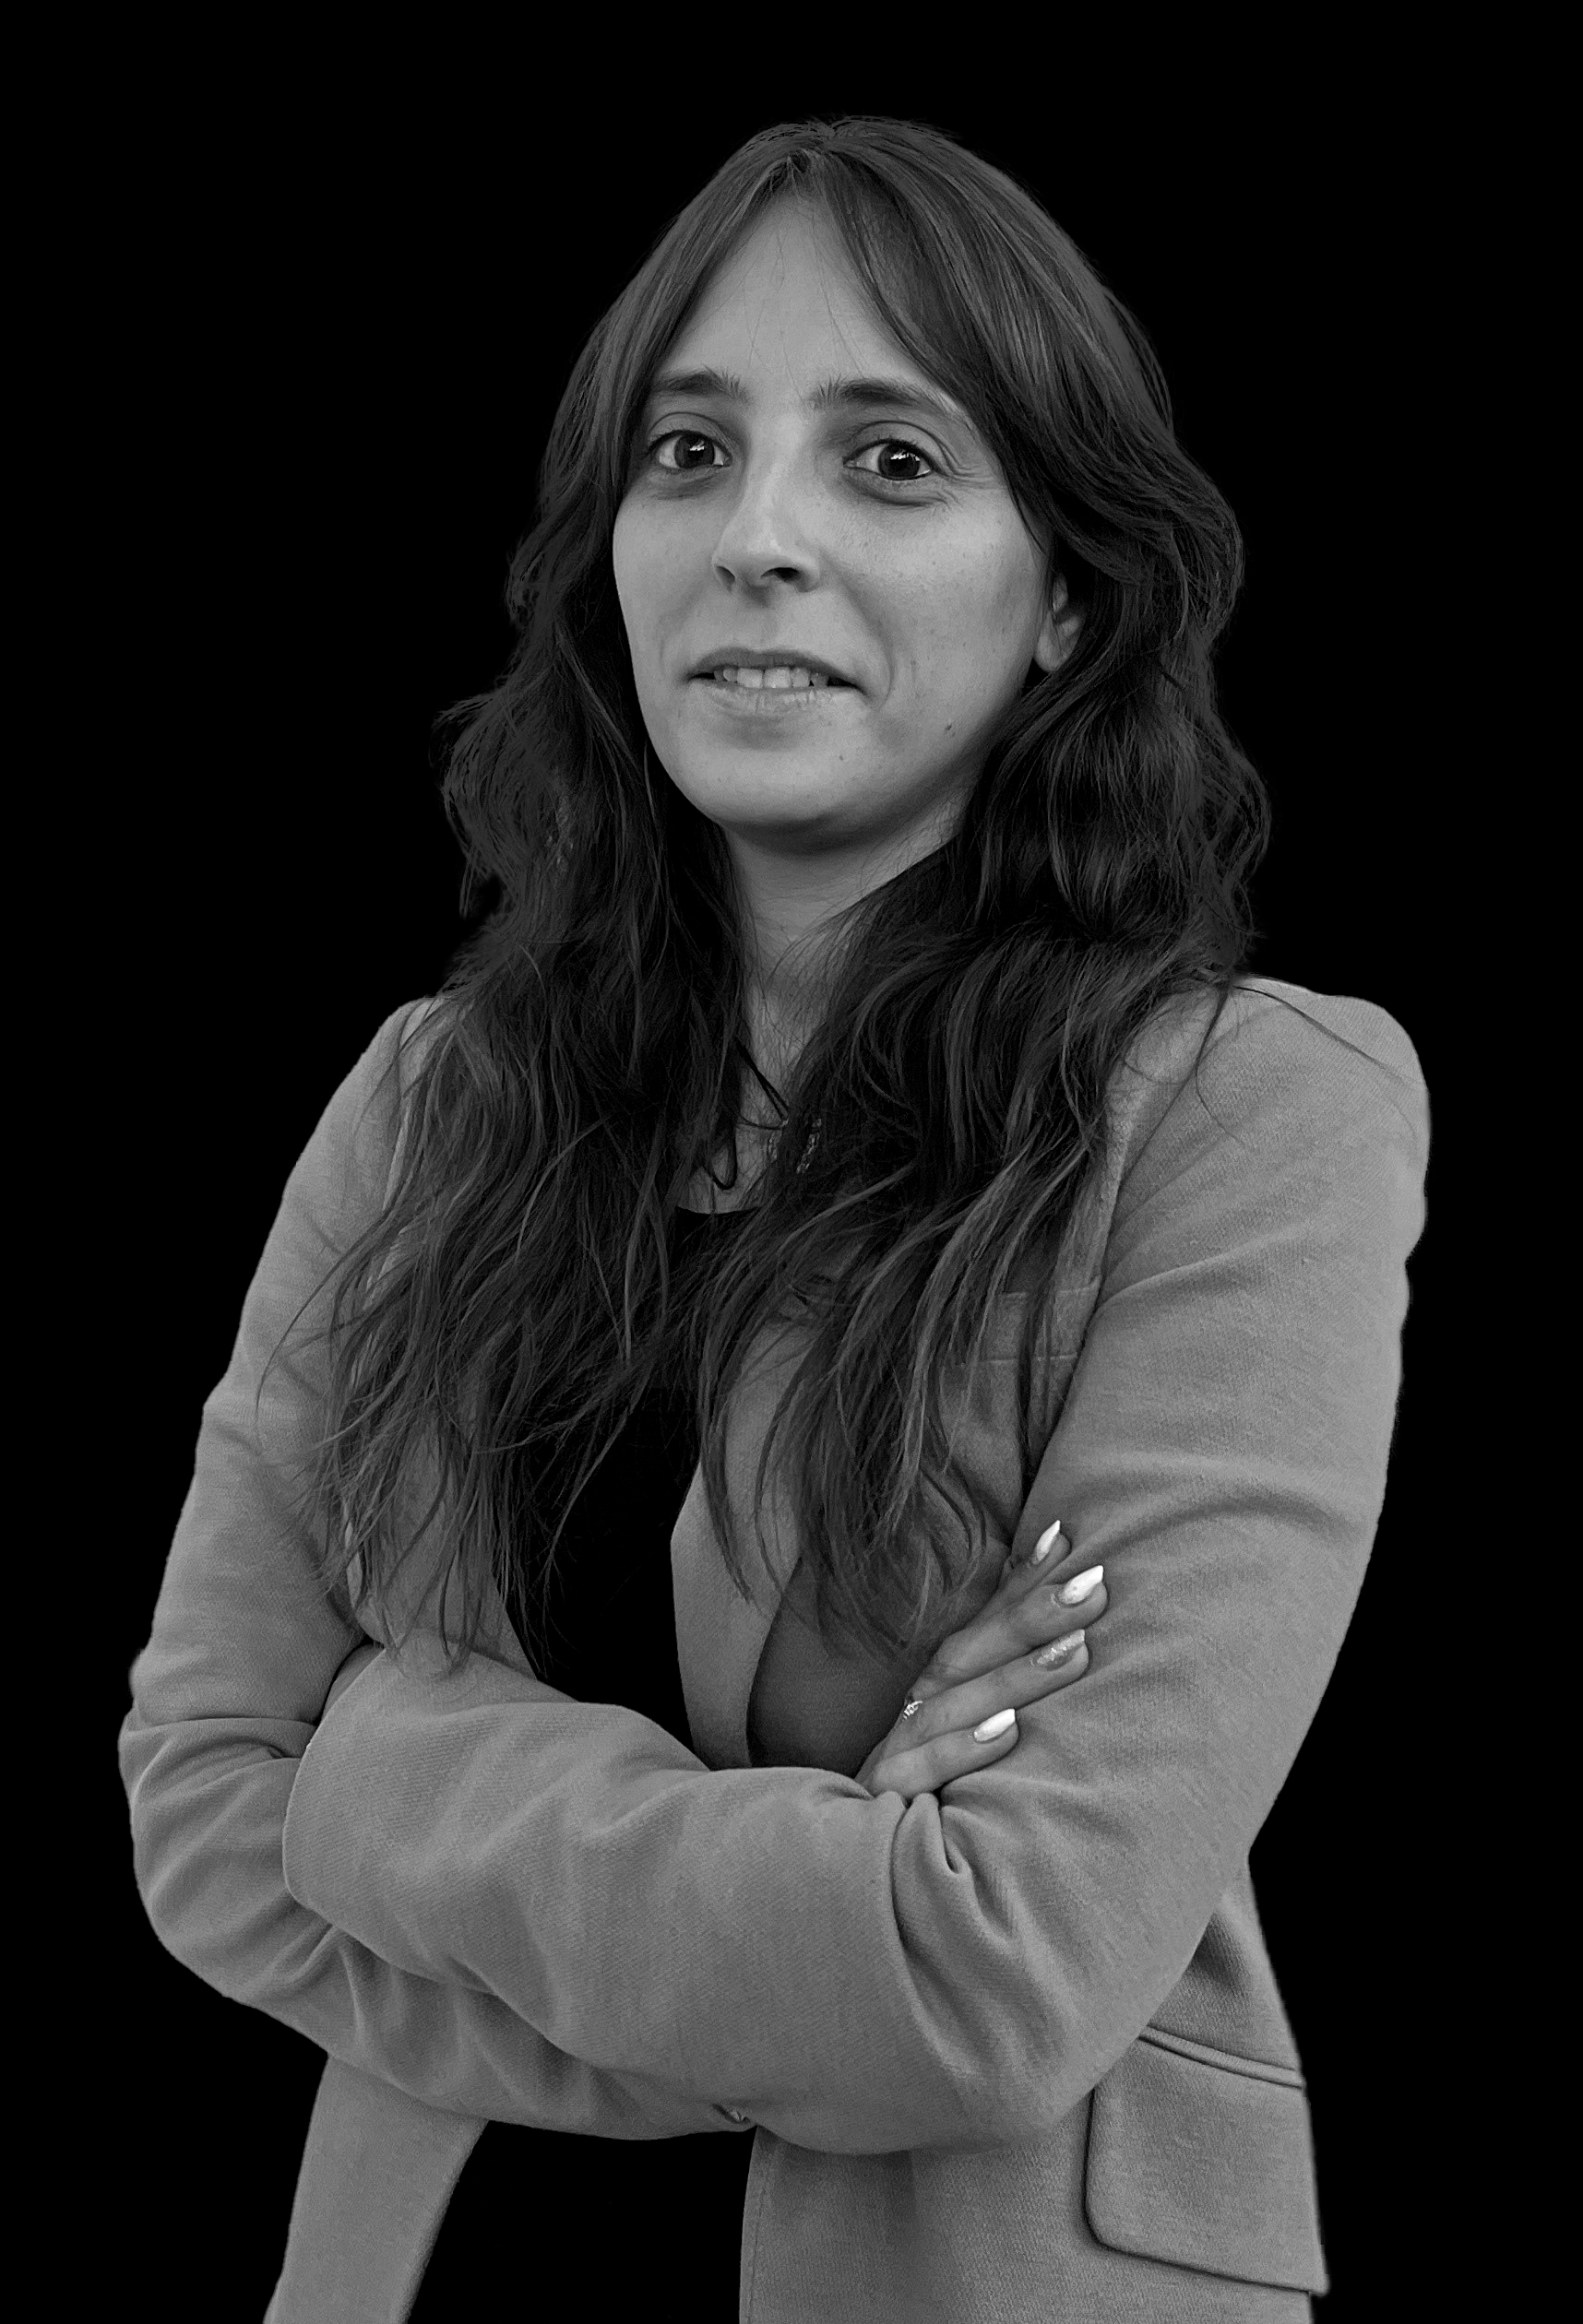 Image new [5 questions à ] Laura FEREOL – Responsable communication & marketing 